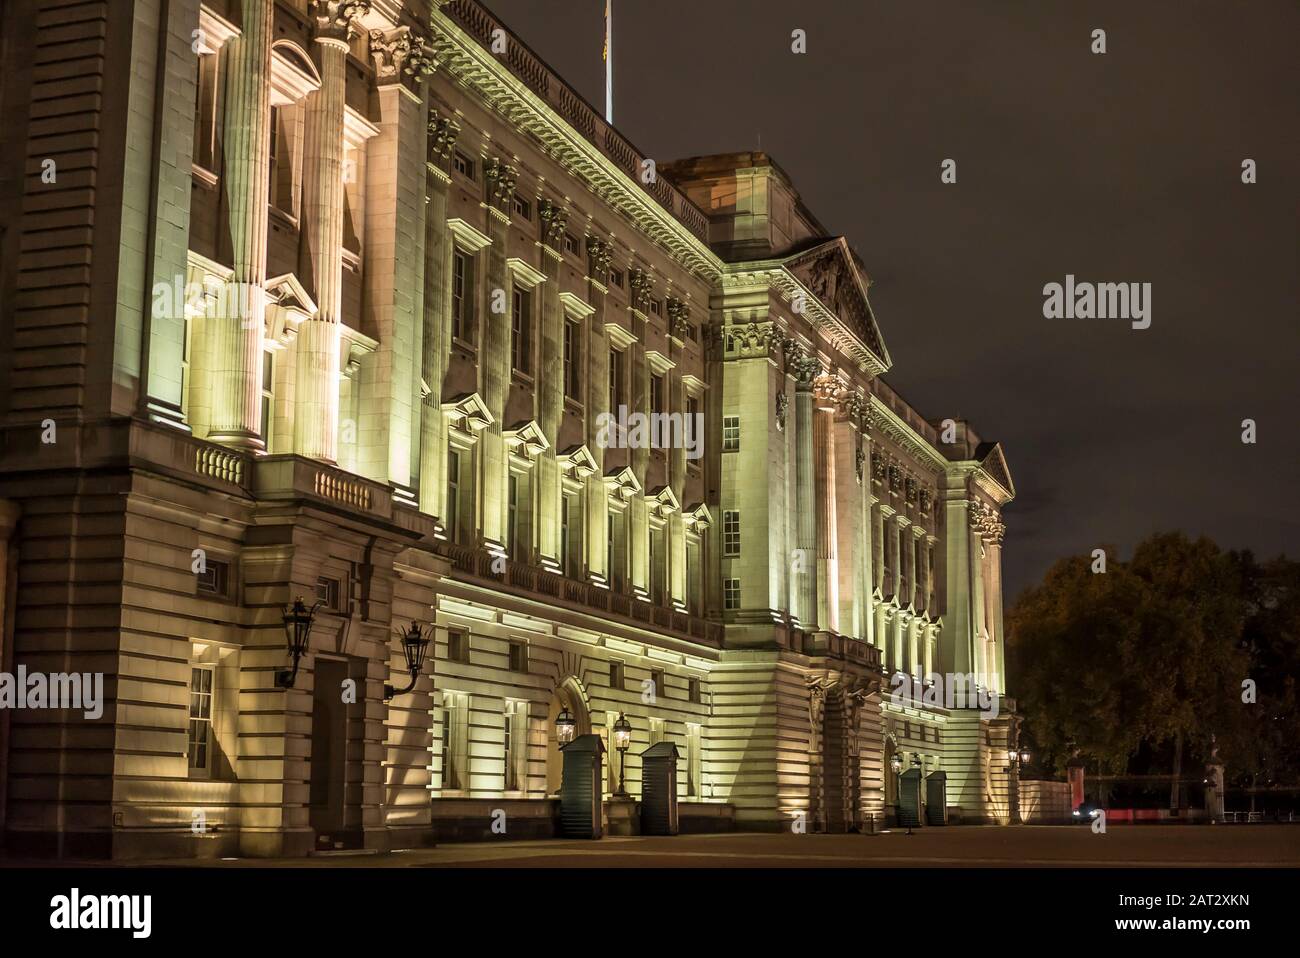 Angled detailed close side view of the famous Buckingham Palace exterior front facade lit up at night on cold November evening. Royal palace residence. Stock Photo